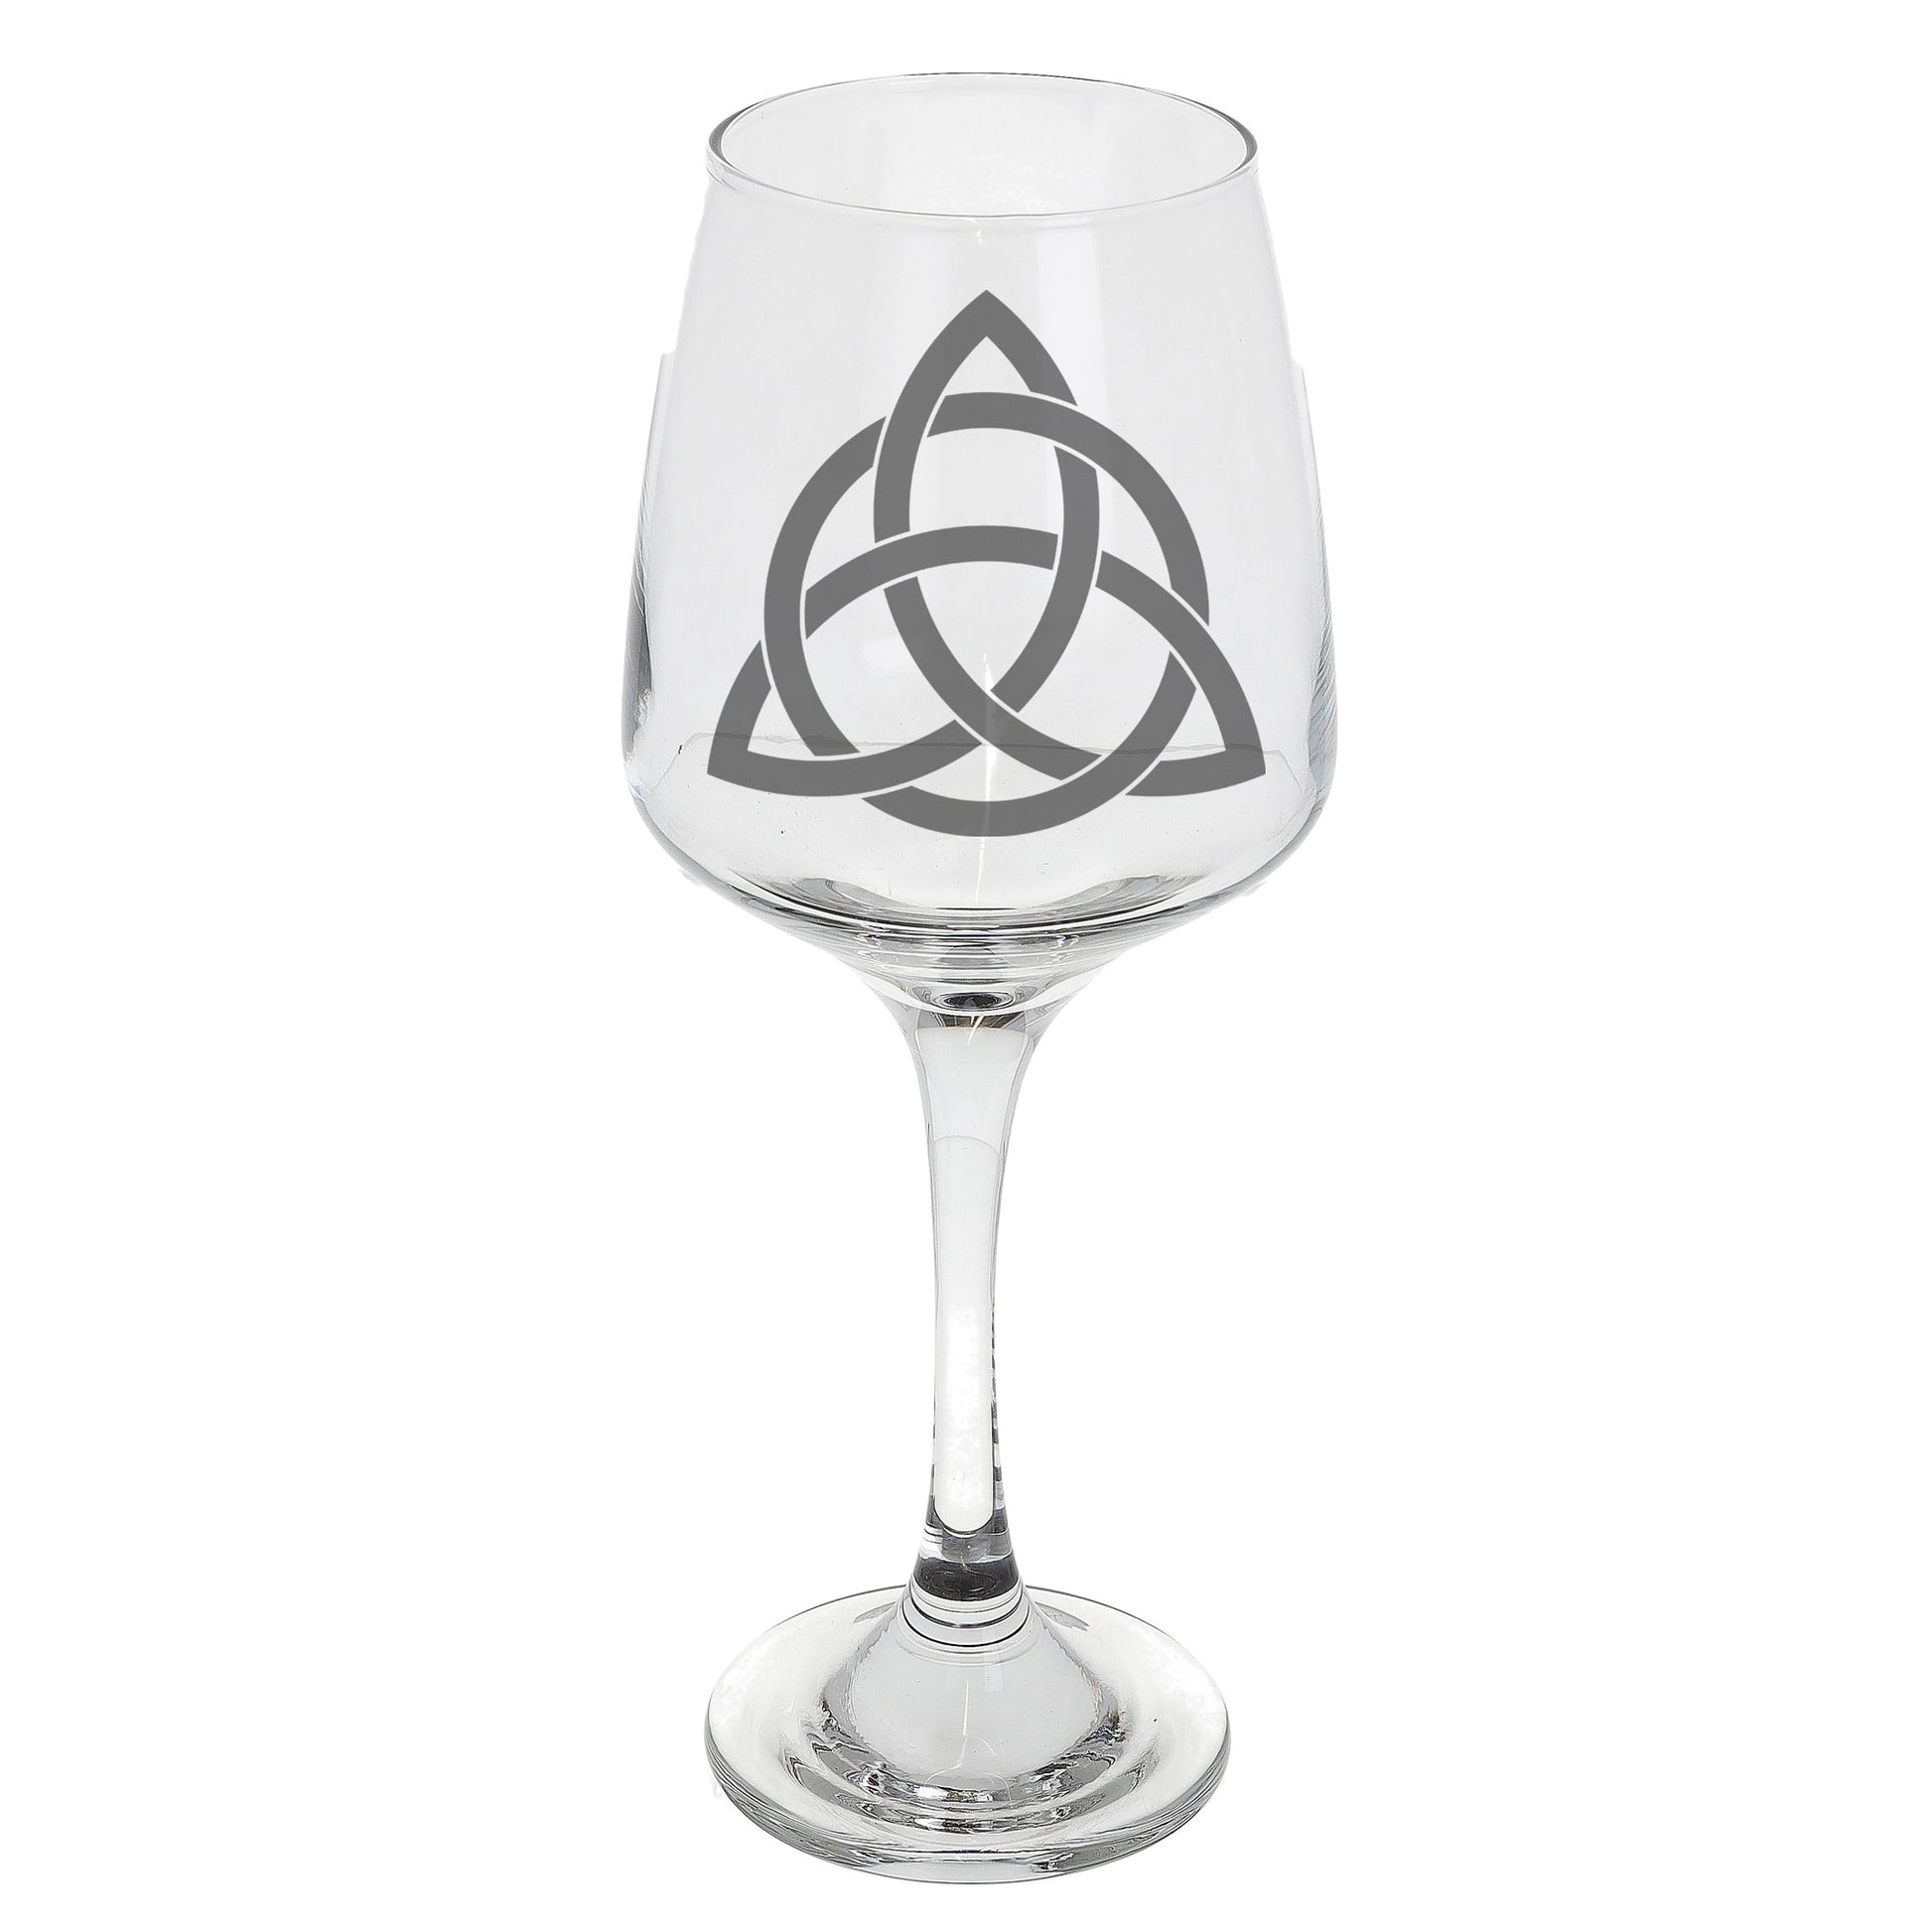 Celtic Knot Irish Engraved Wine Glass and/or Coaster Set  - Always Looking Good - Wine Glass Only  